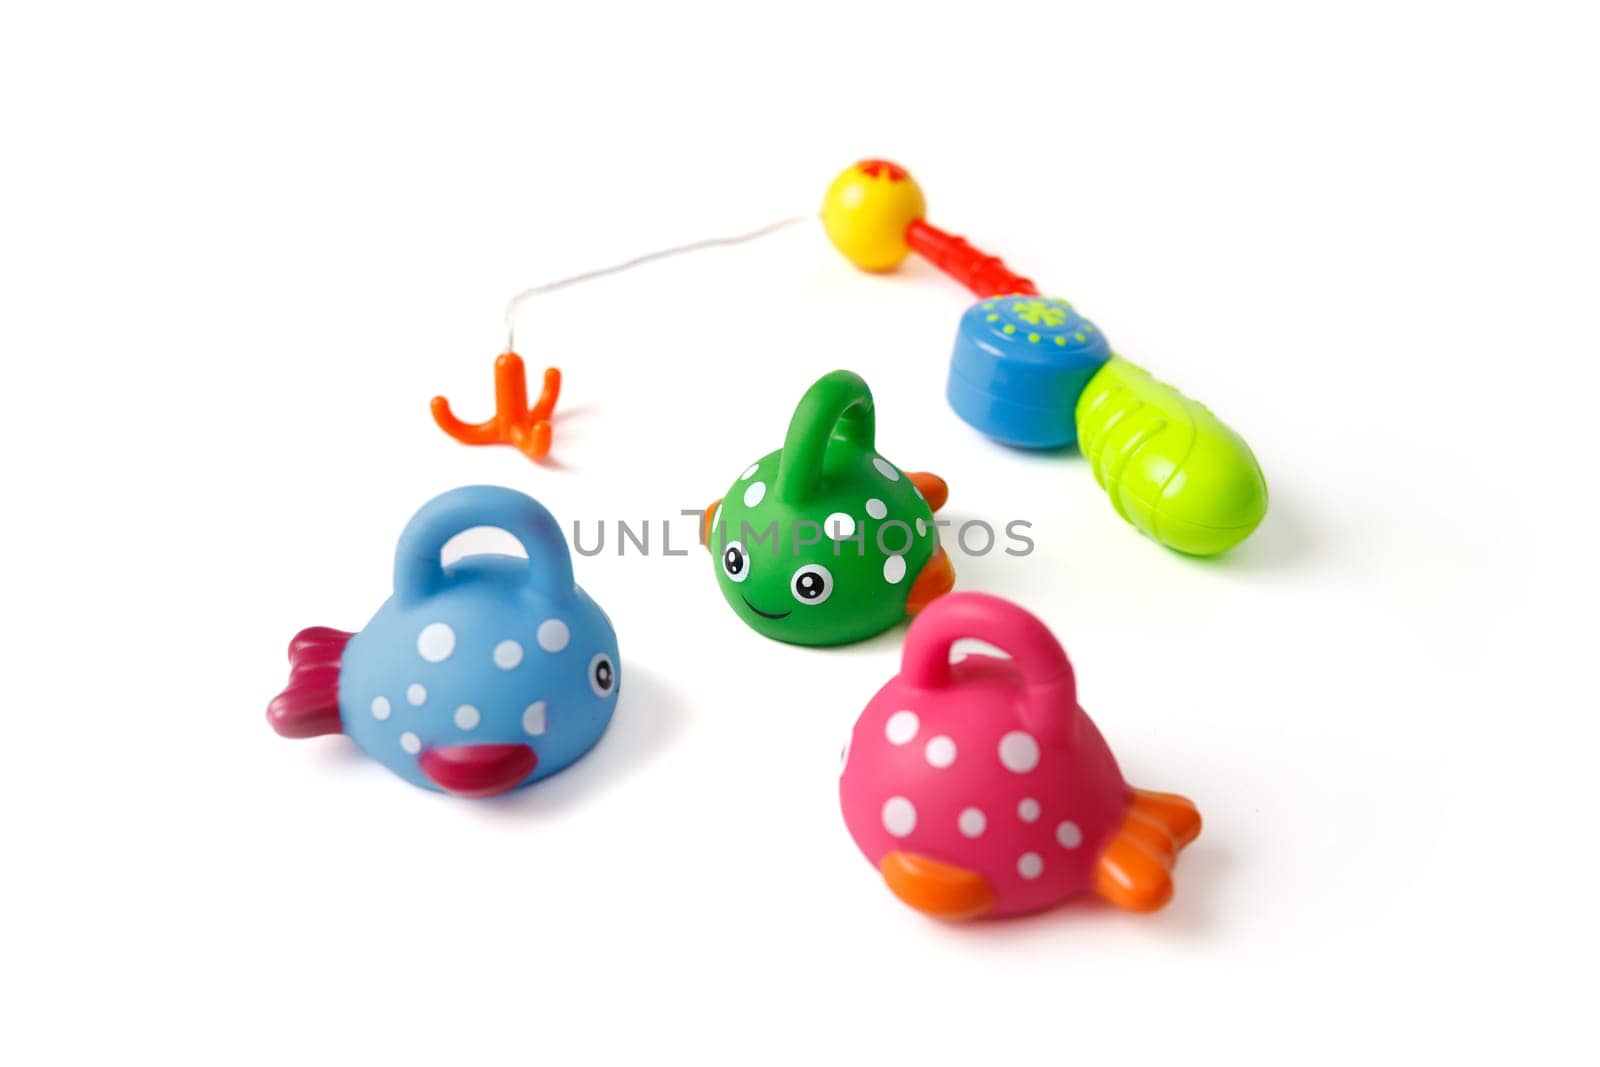 Children's set of fishing toys with cute fish and fishing rod on a white background by Rom4ek